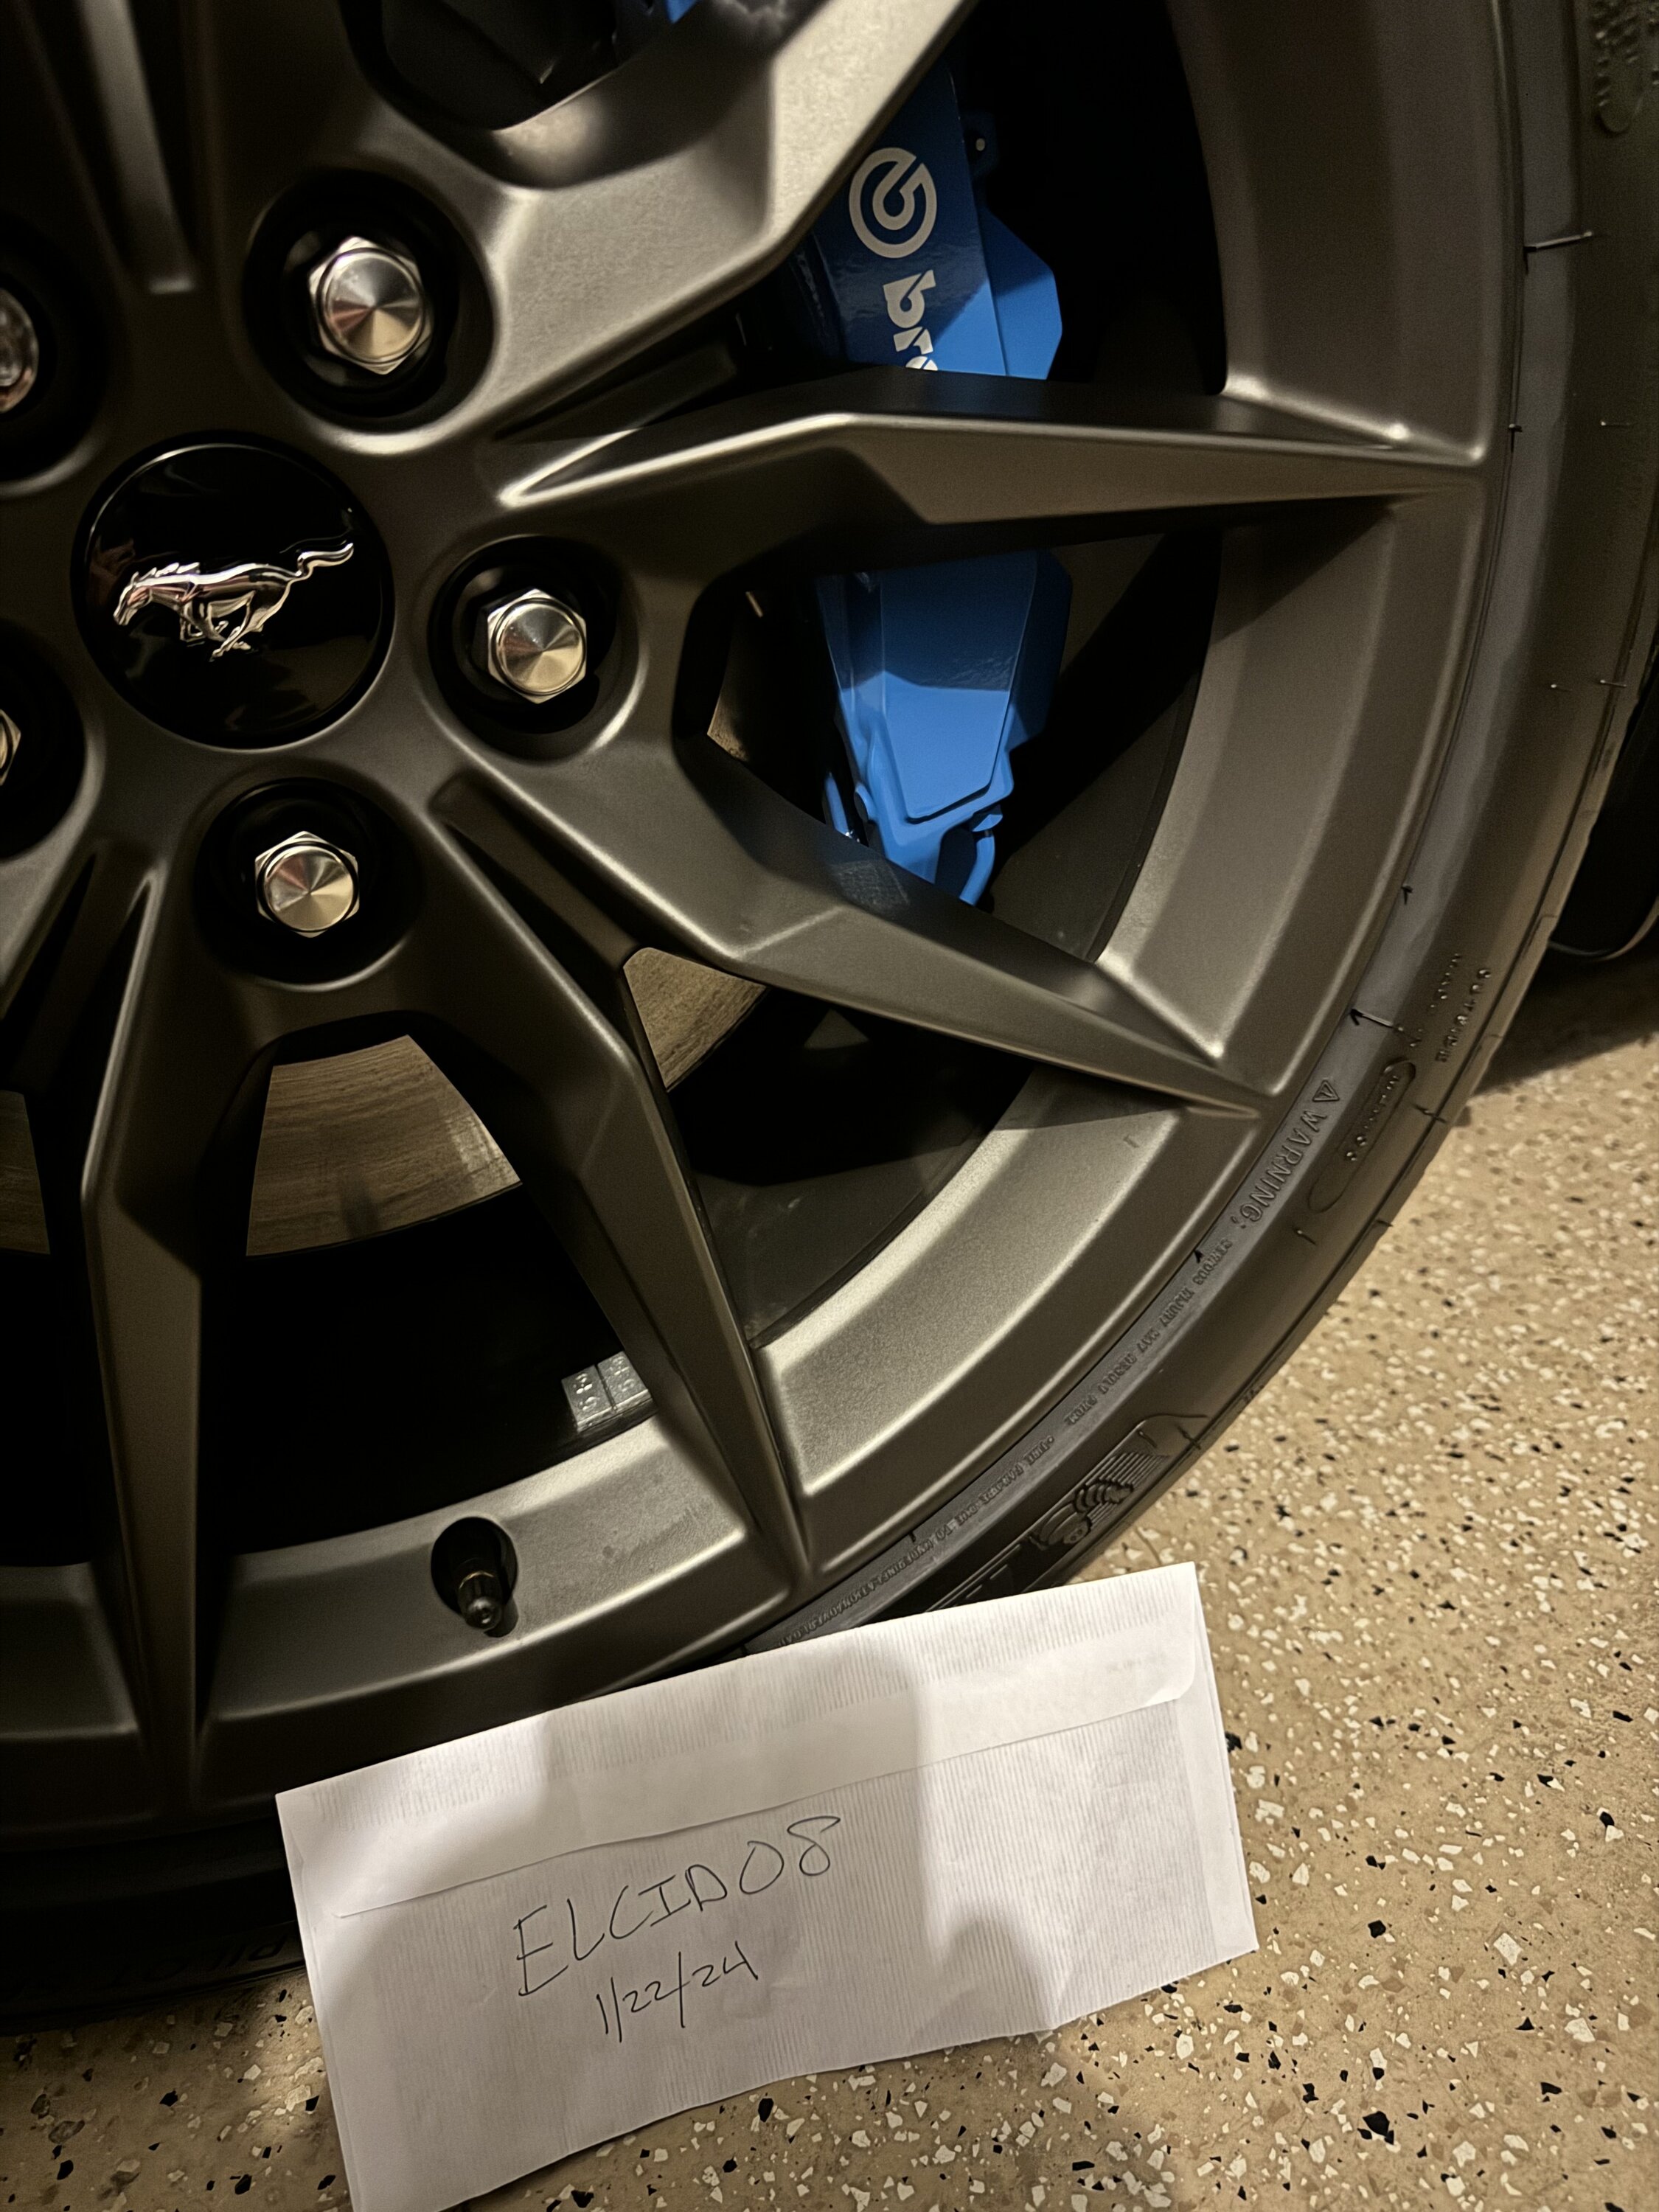 S650 Mustang Pirelli P Zero tires from my Dark Horse(delivery miles) IMG_0567